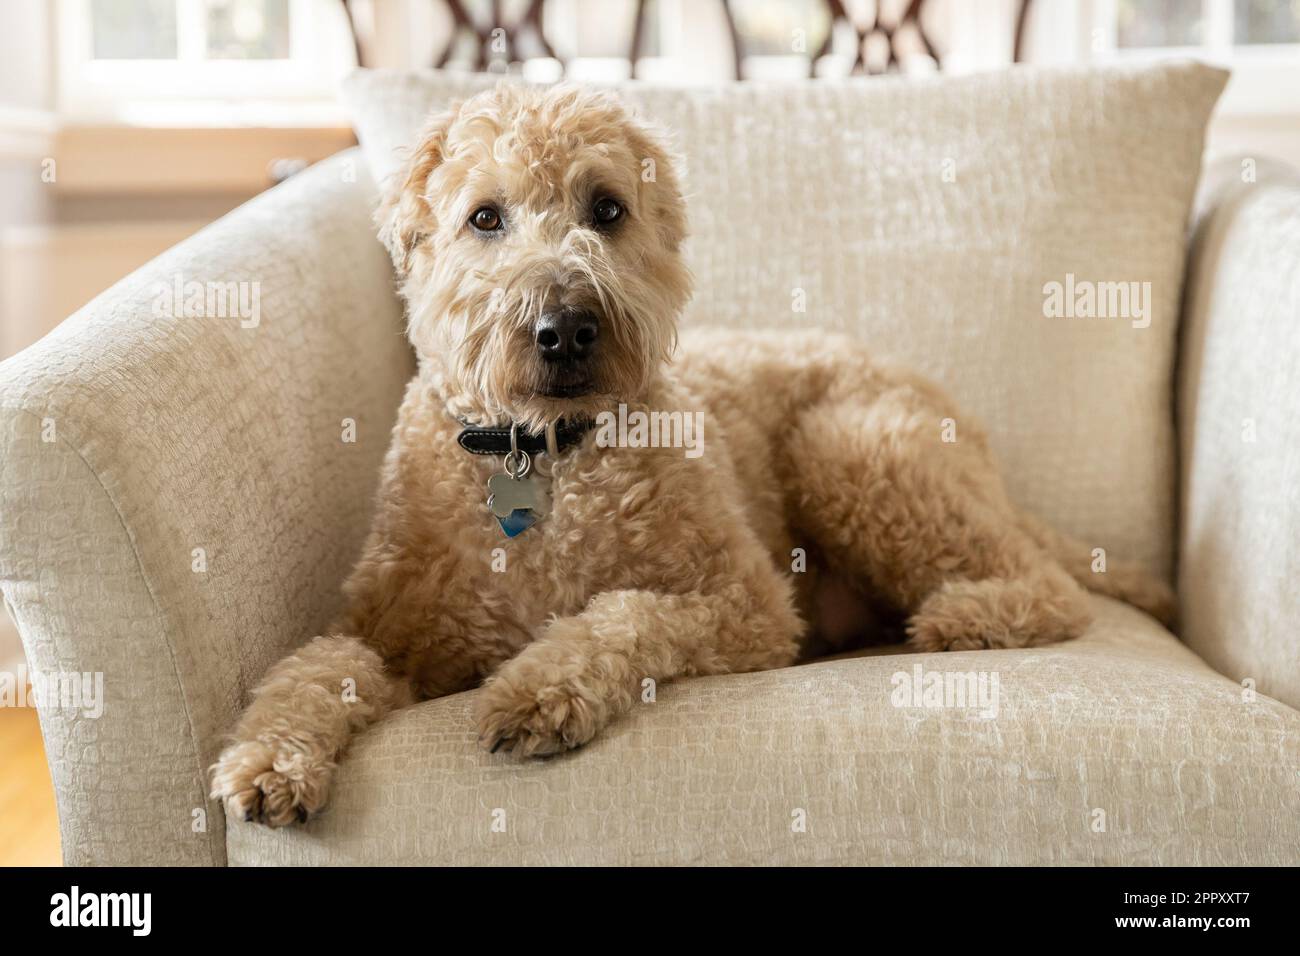 A brown, soft-coated wheaten terrier and poodle mix dog laying on a brown chair with a blurred background. Stock Photo